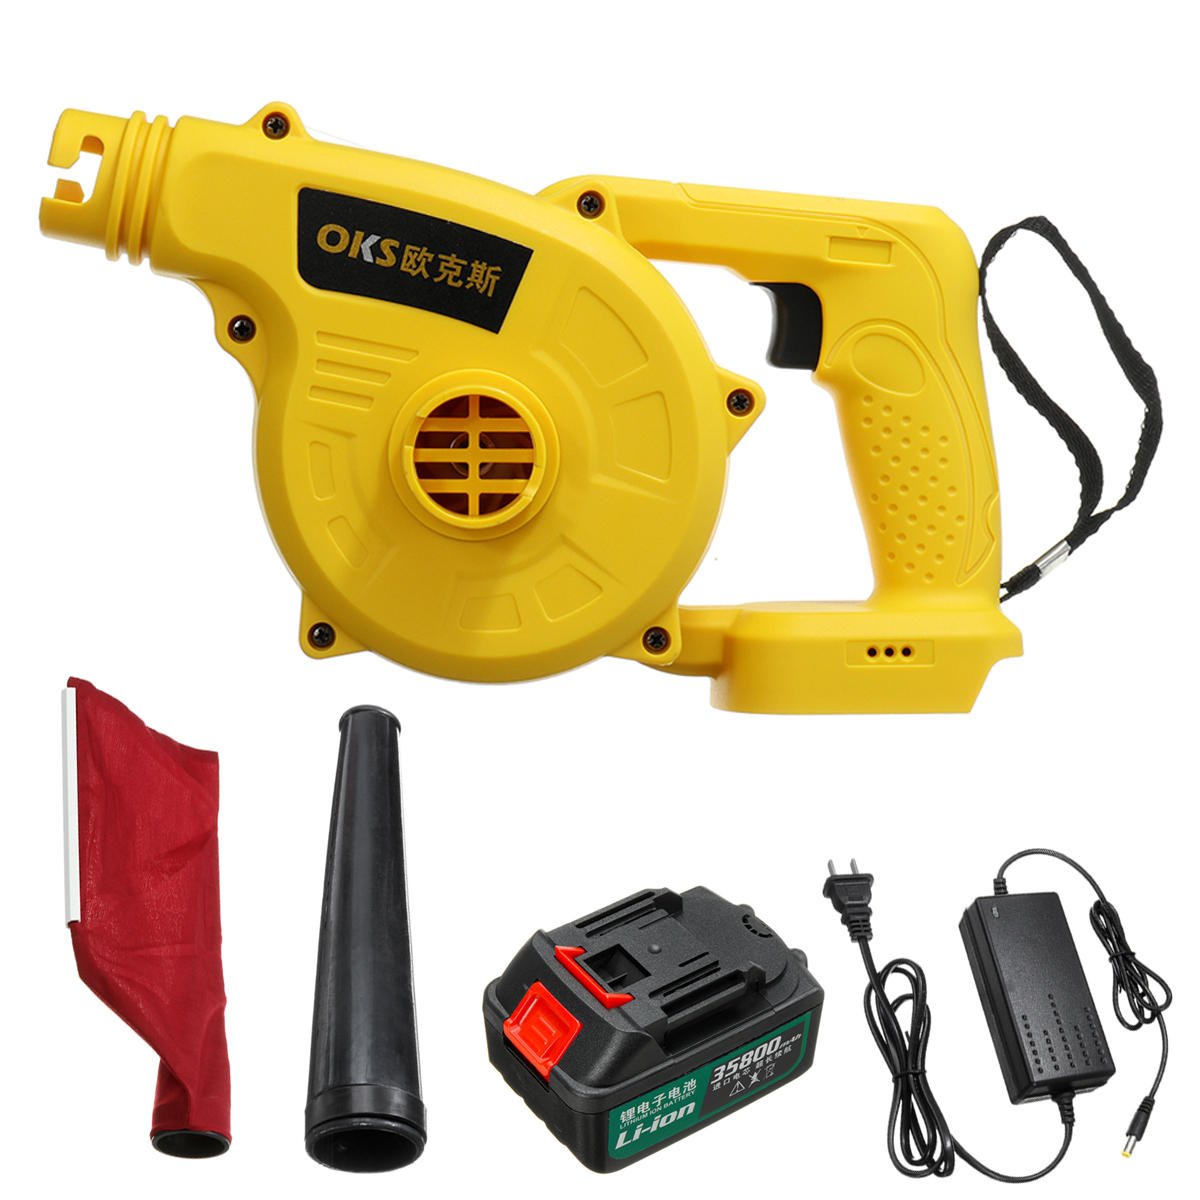 

110-220V Cordless Handheld Electric Blower Air Vacuum Dust Leaf Cleaner Sweeper One Lithium Battery